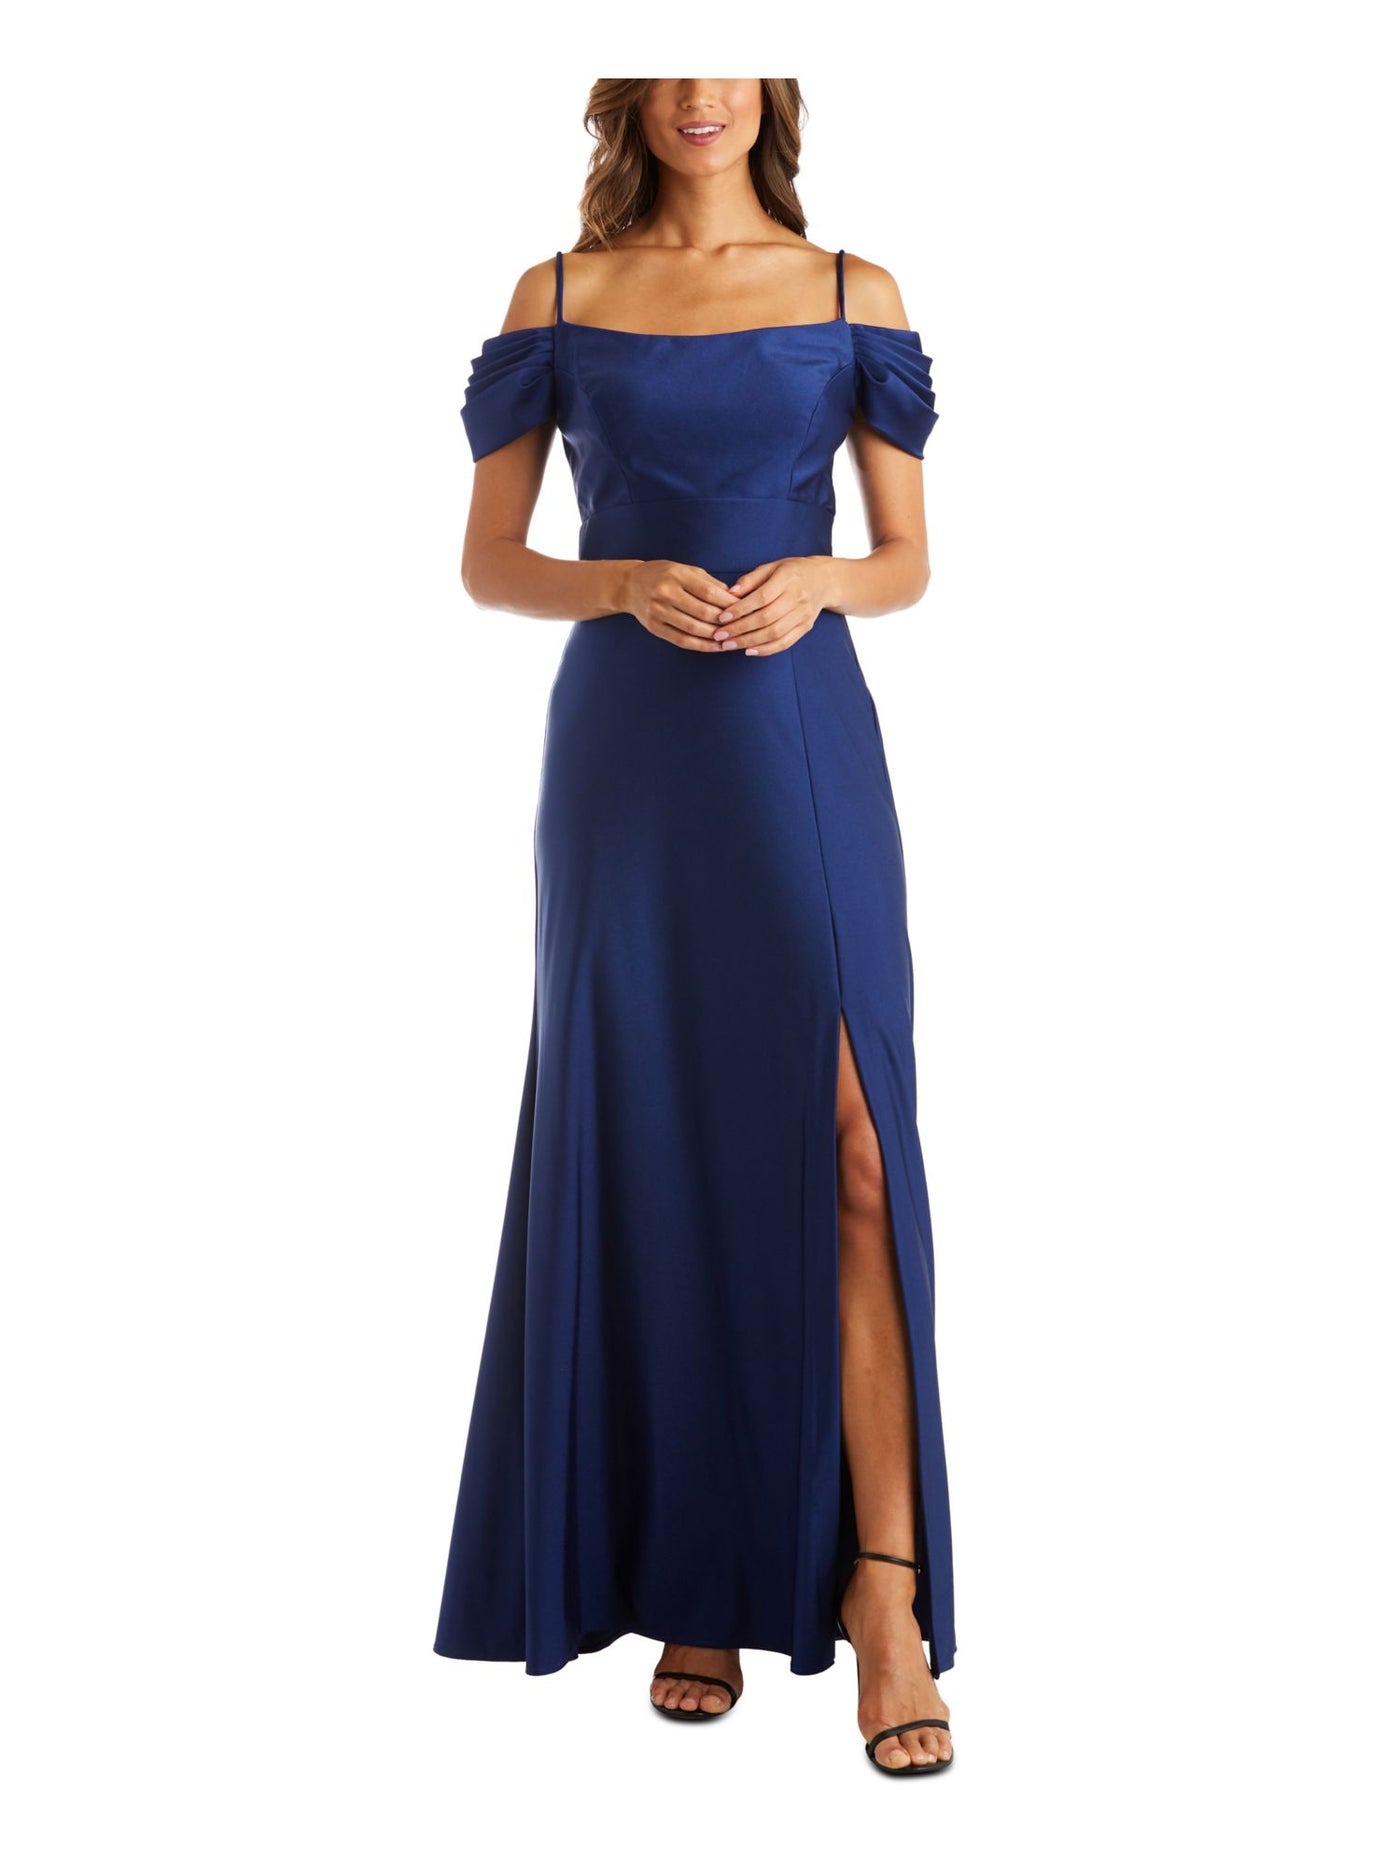 NIGHTWAY Womens Blue Cold Shoulder Slitted Gown Short Sleeve Square Neck Maxi Formal Fit + Flare Dress Petites 10P